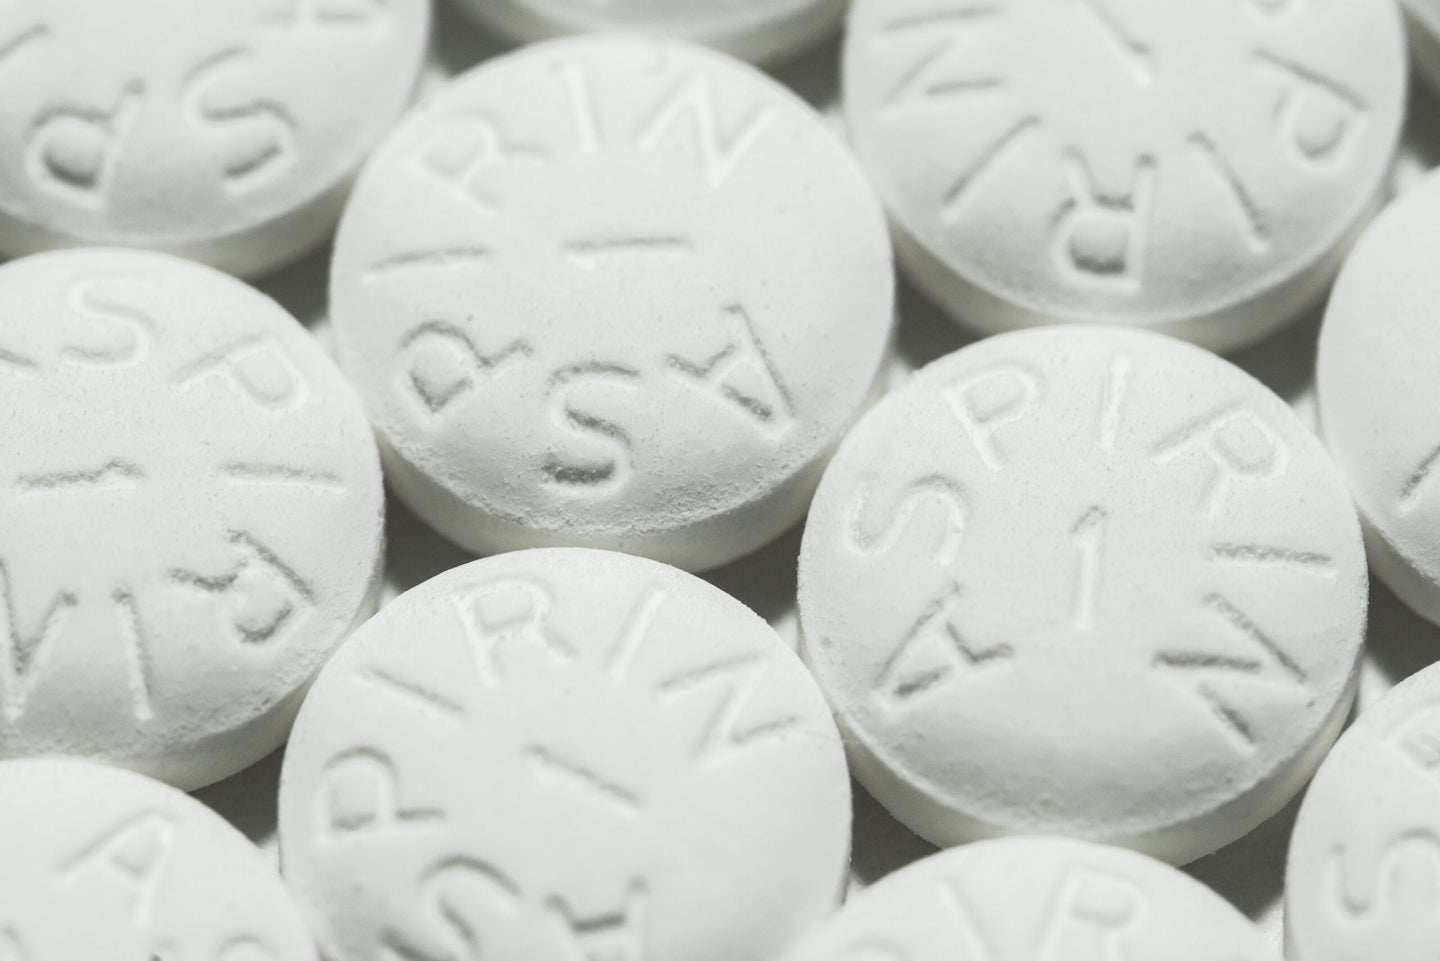 The US Preventive Services Task Force, an independent group of experts that advise on disease prevention and evidence-based medicine, has updated its recommendations, saying that for older adults, preemptively taking aspirin is not worth the risks. 